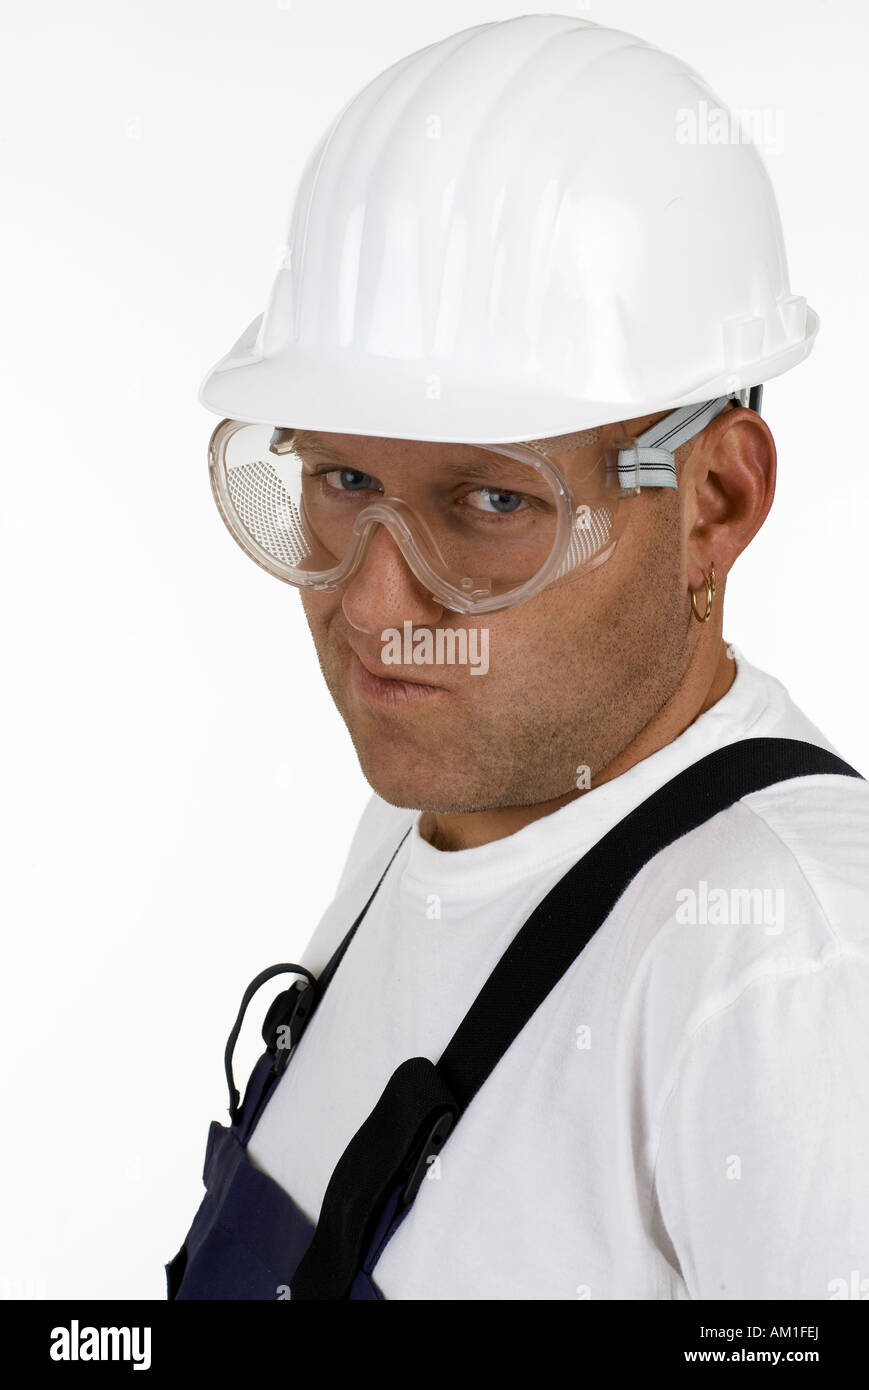 Craftsman with protective goggles and helmet Stock Photo